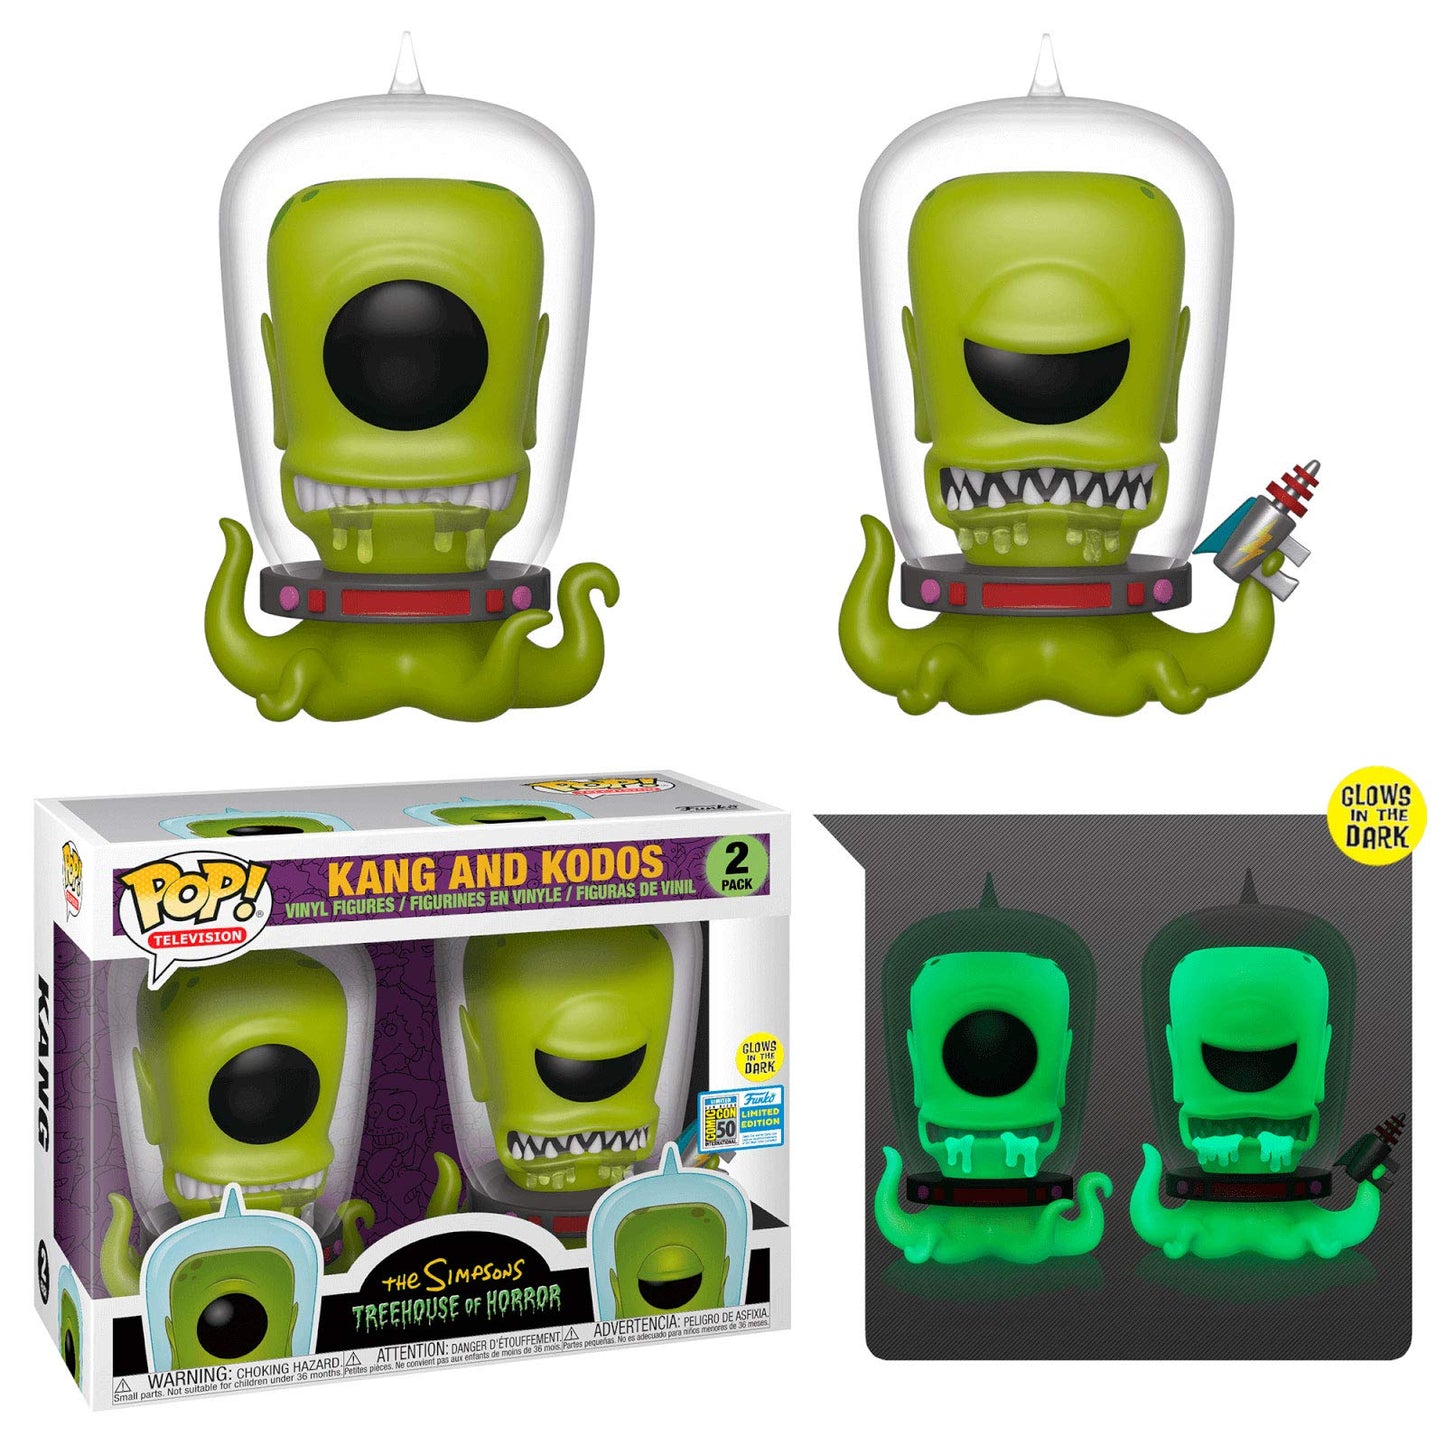 Funko POP! Simpsons Treehouse of Horror Kang and Kodos Exclusive 2 Pack Exclusive